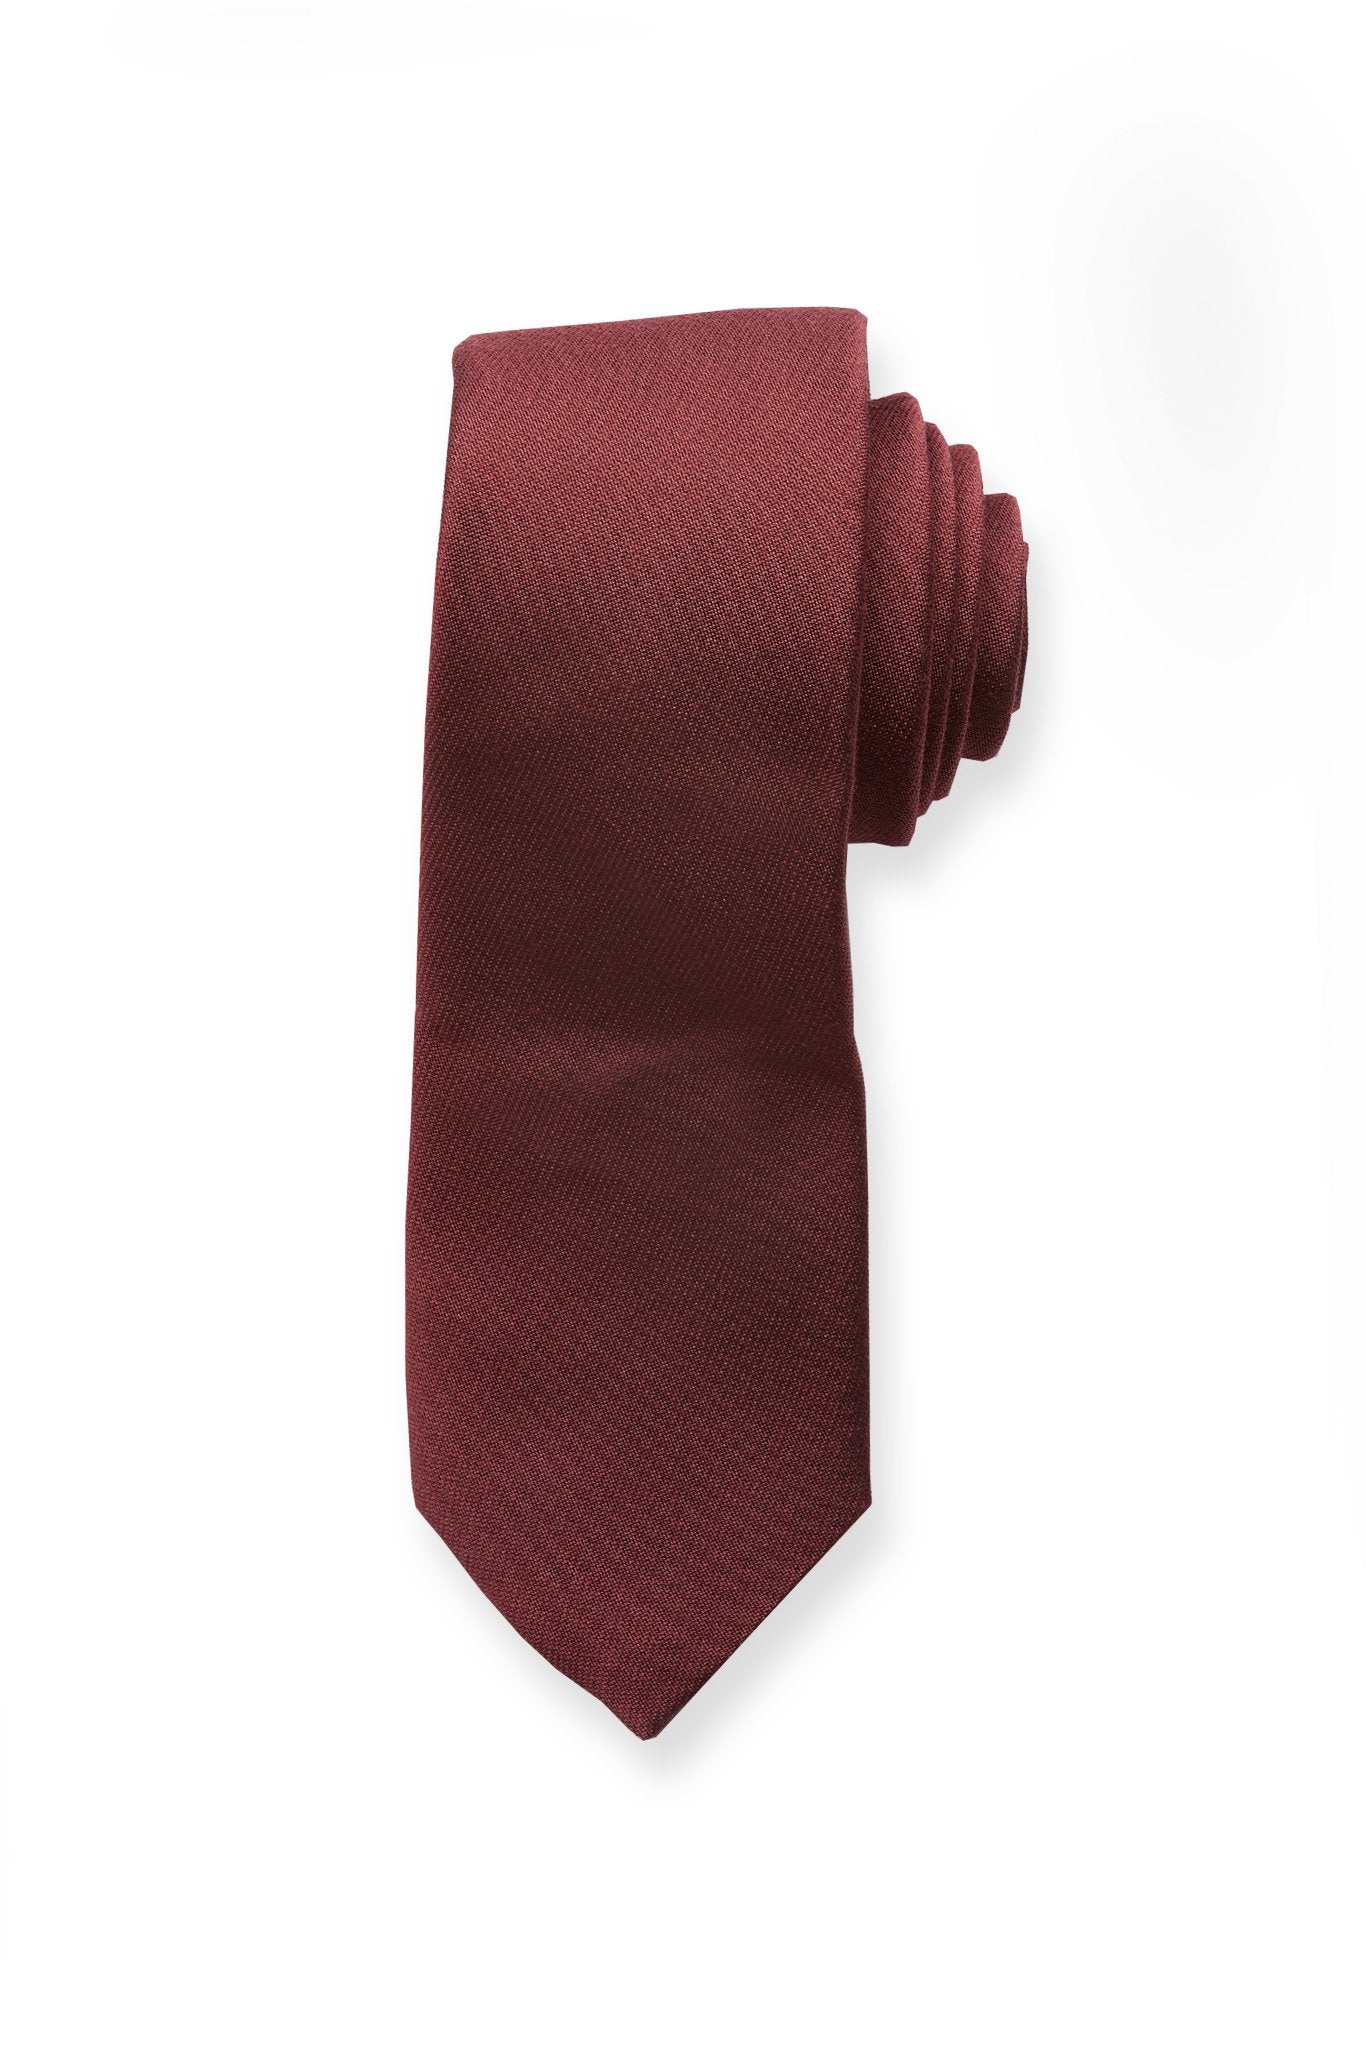 Simon Necktie in Rosewood by Birdy Grey, front view